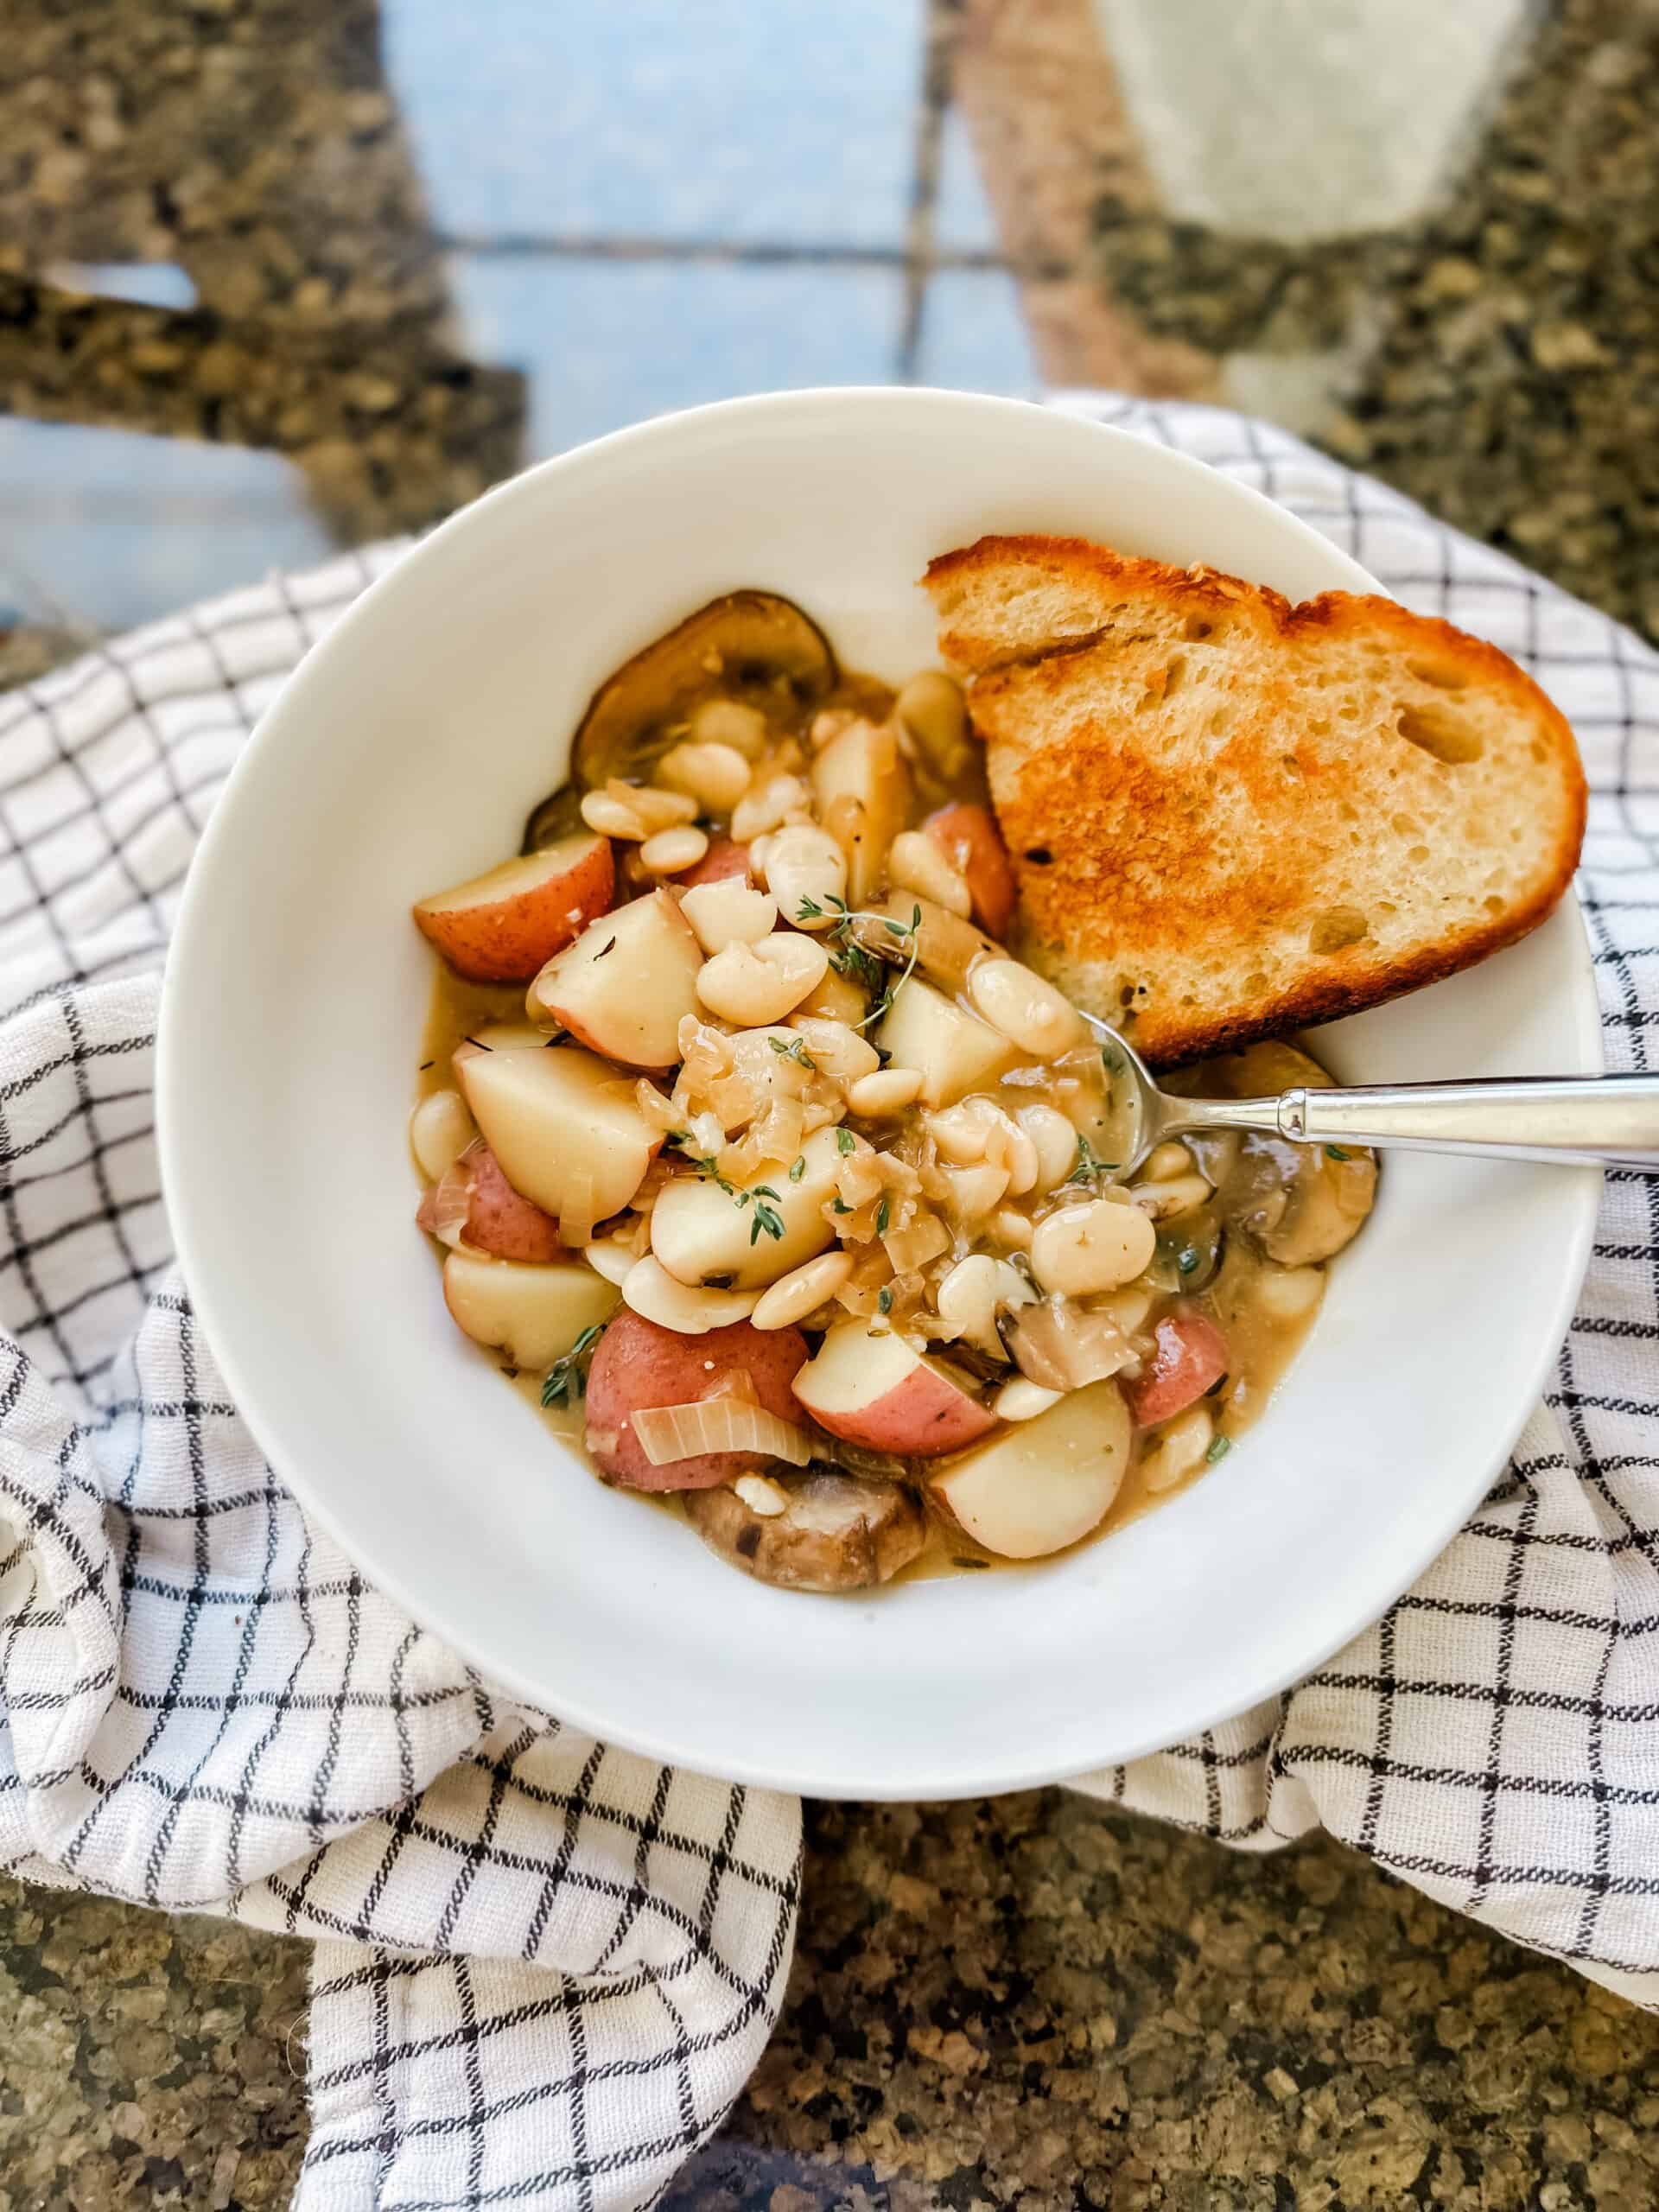 A cozy bowl of Creamy Mushroom and White Bean Stew, featuring a rich, creamy broth filled with tender slices of mushrooms, soft cubes of baby potatoes, and creamy white beans. The stew is garnished with a sprinkle of fresh thyme and rosemary on top, adding a pop of green to the warm, earthy tones of the dish.